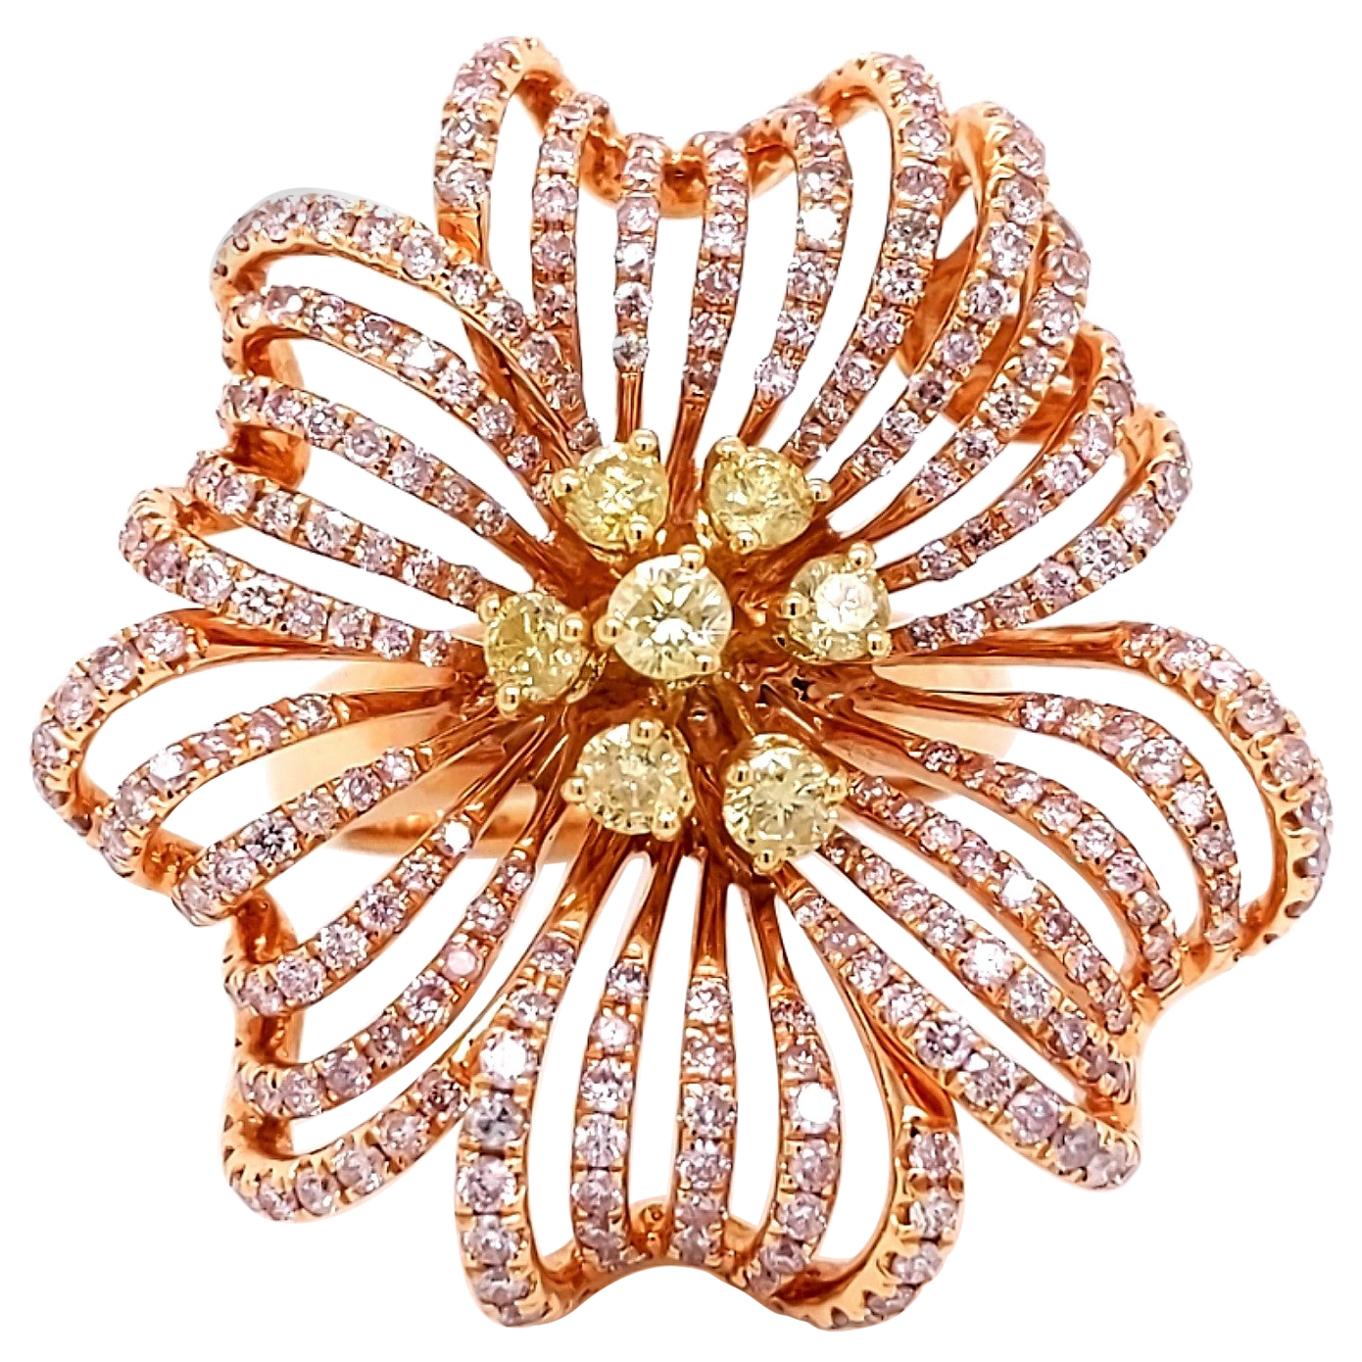 2.58 Carat Natural Fancy Yellow and Pink Diamond Flower Ring in 18k Rose Gold For Sale